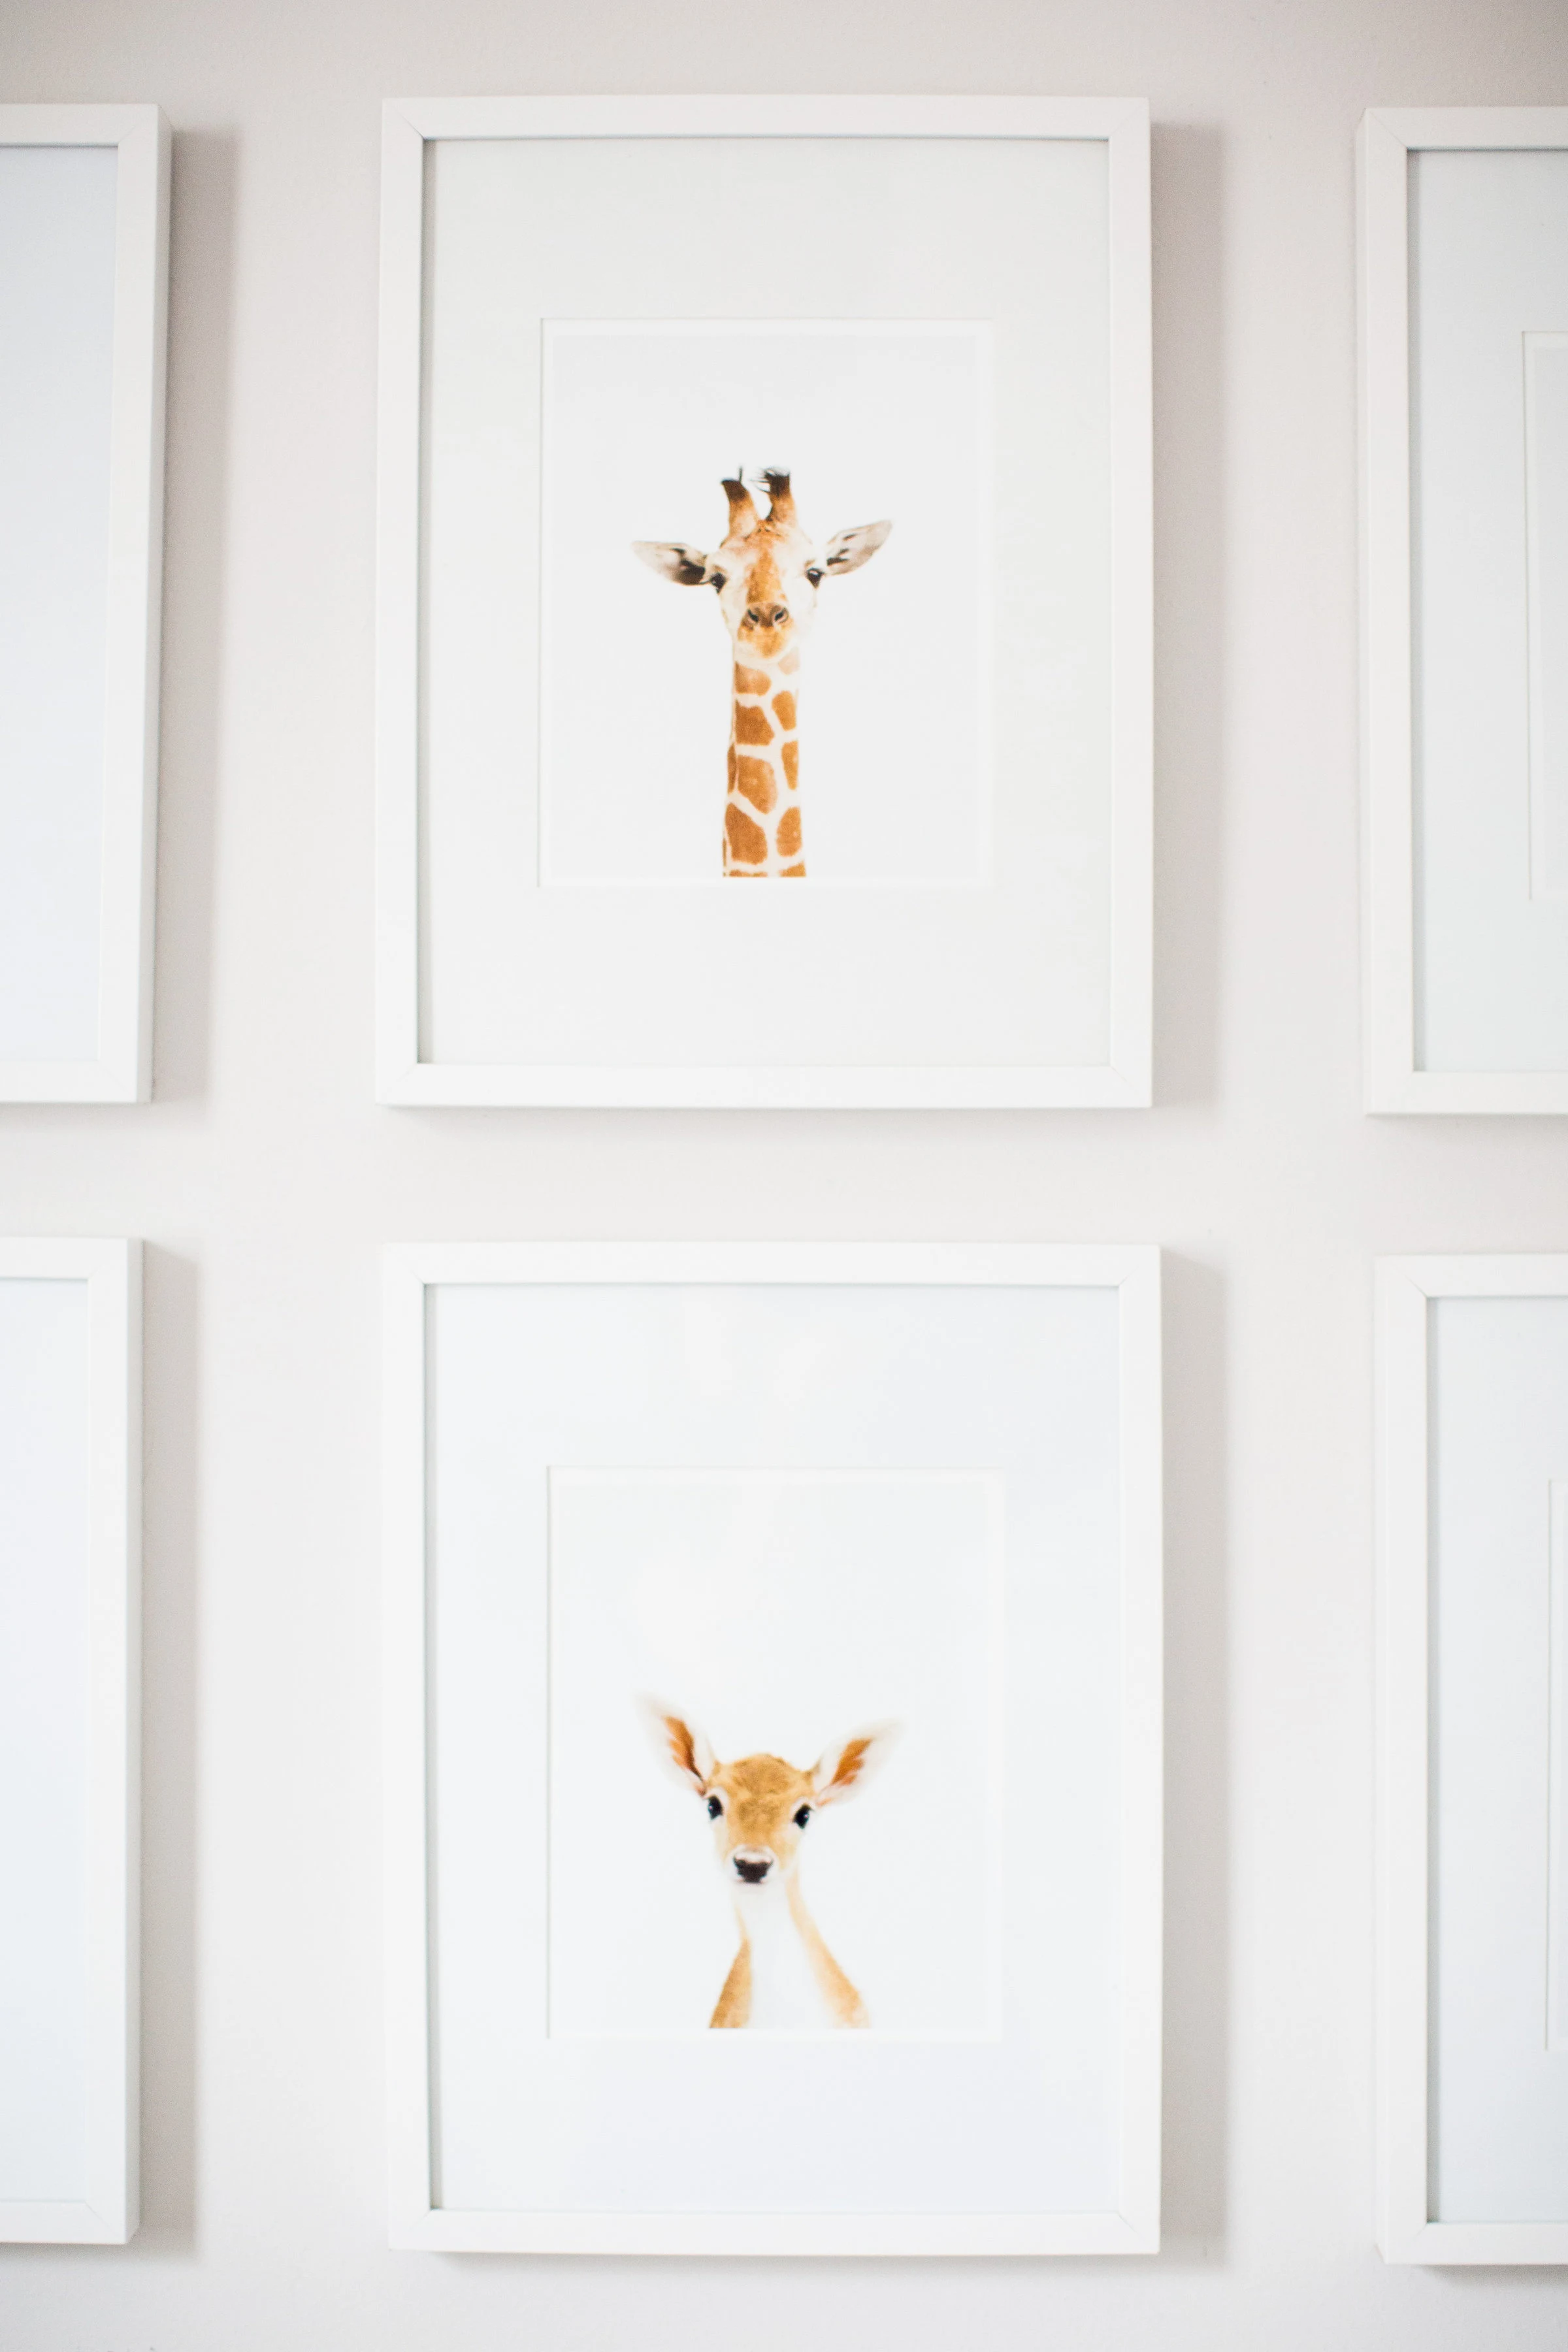 Safari-Inspired Nursery with Gender-Neutral Decor and Animal Accents